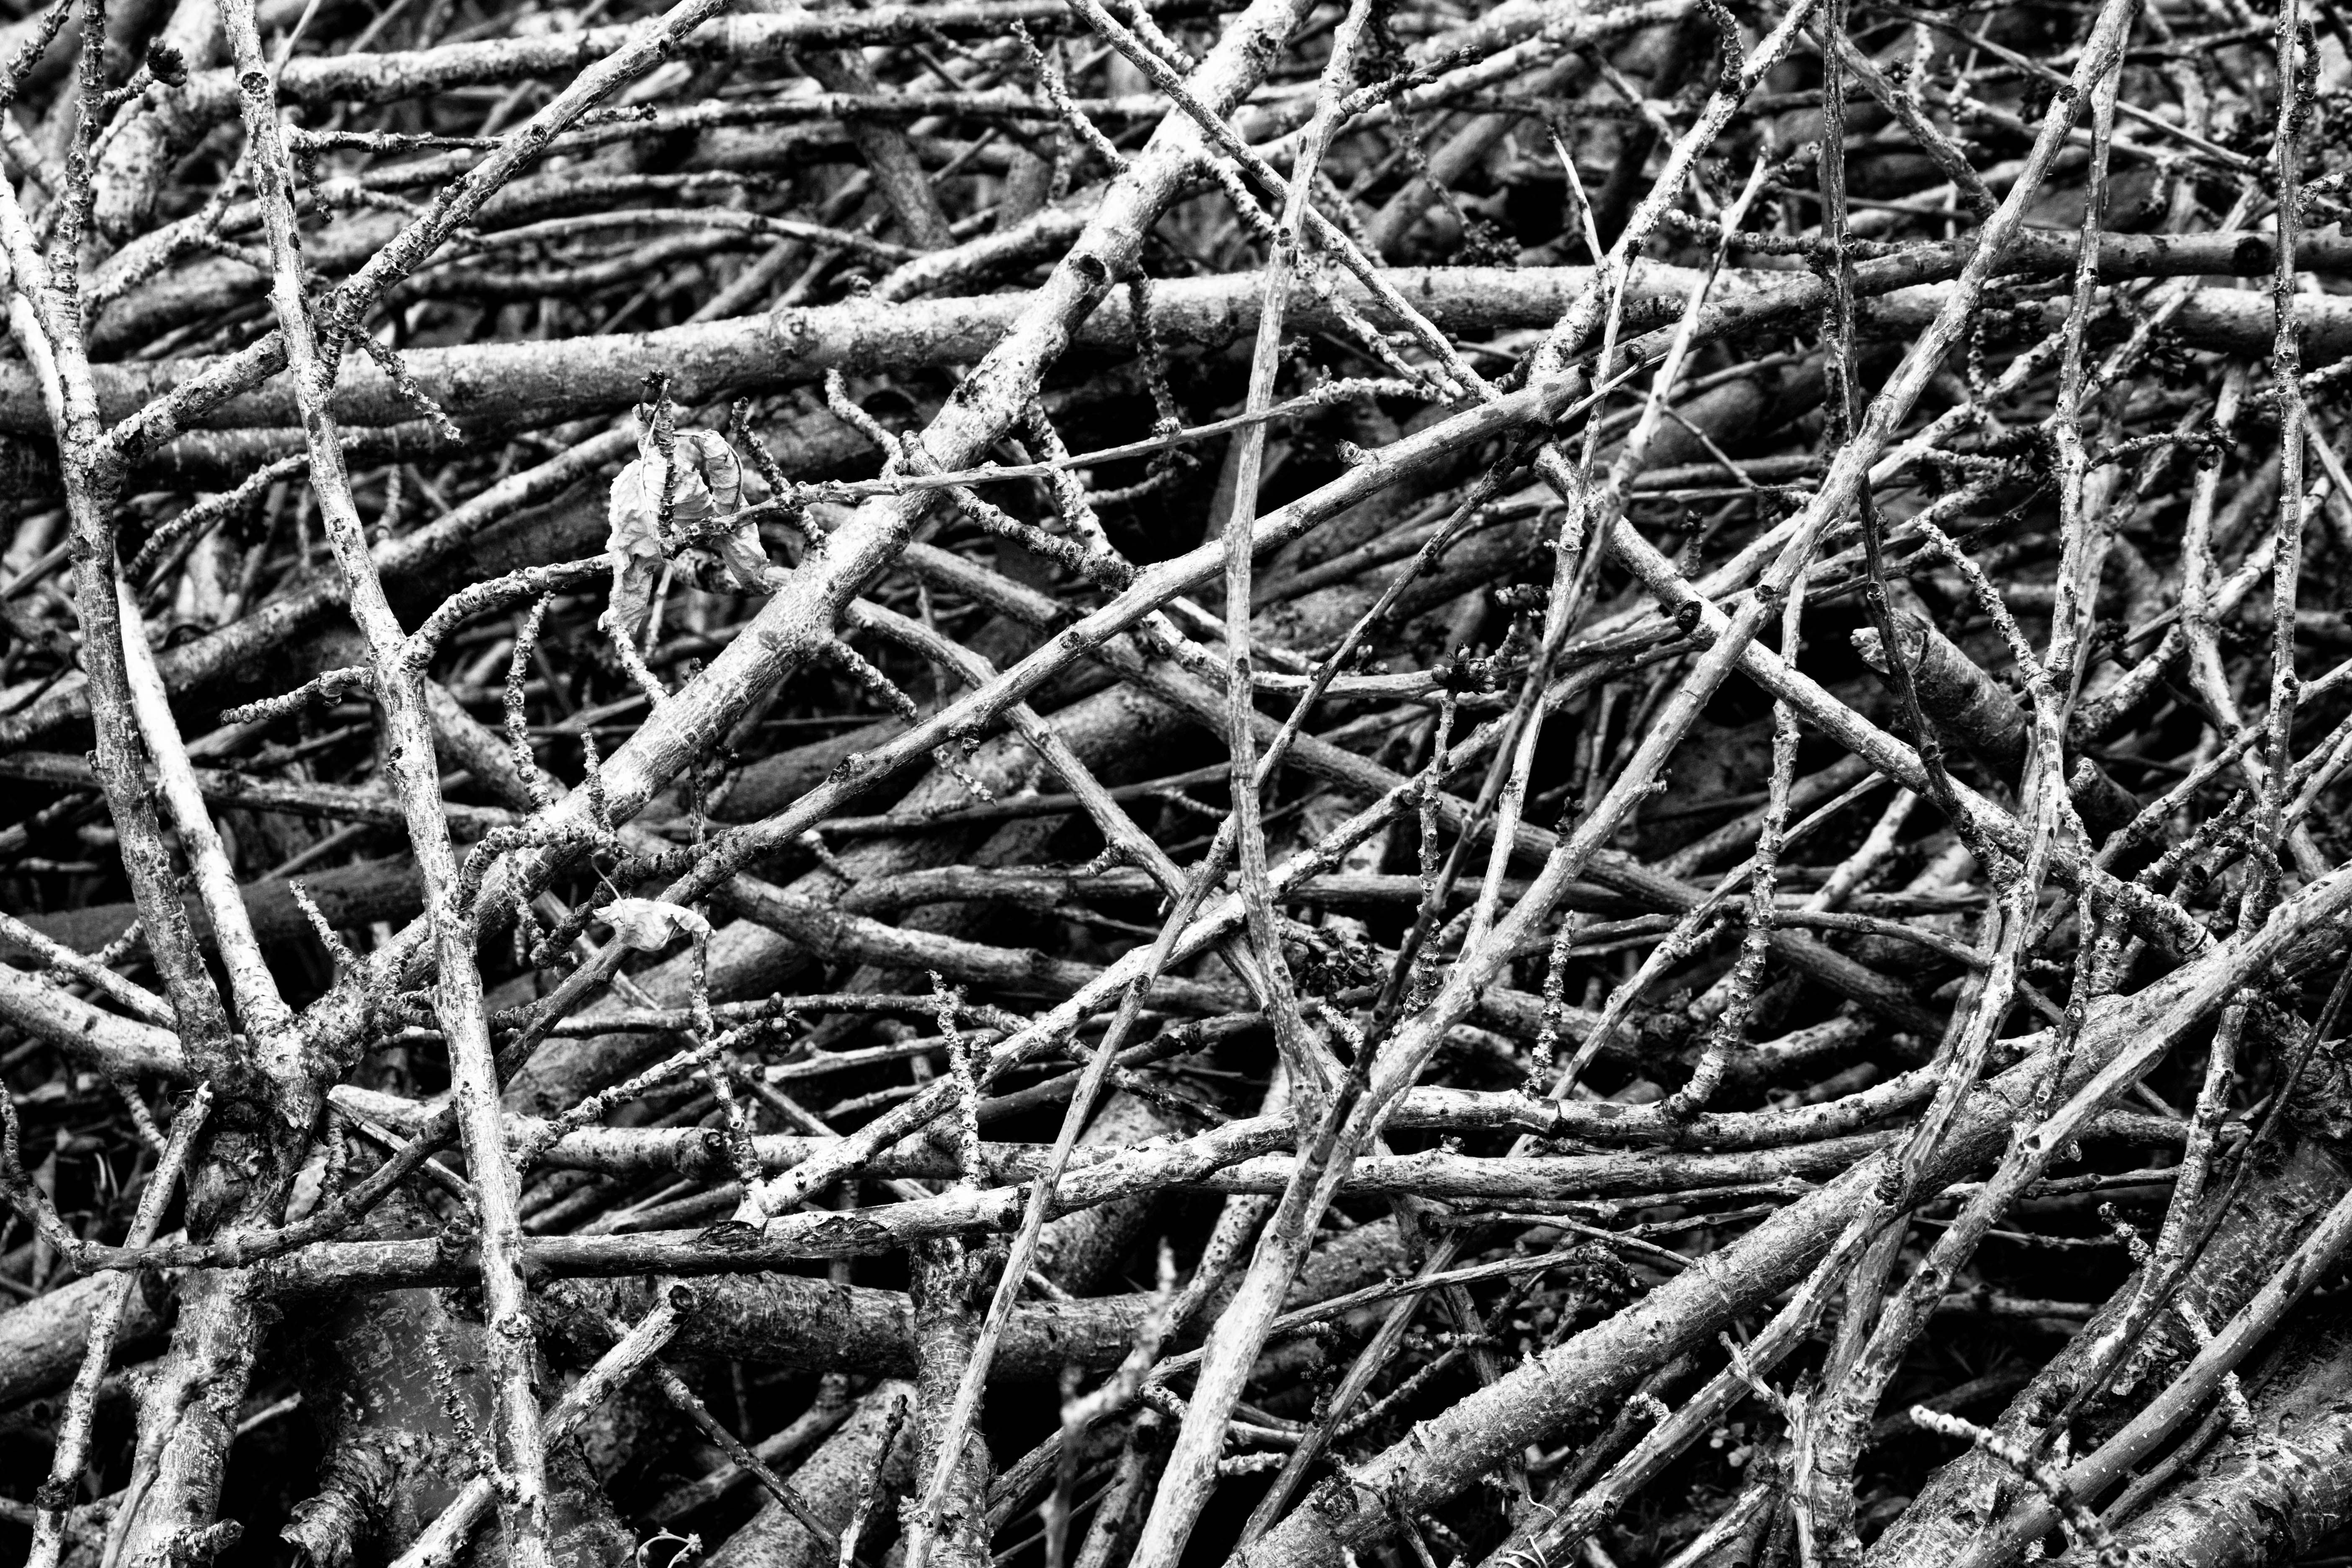 abstract tree branches - Google Search | Texture | Pinterest